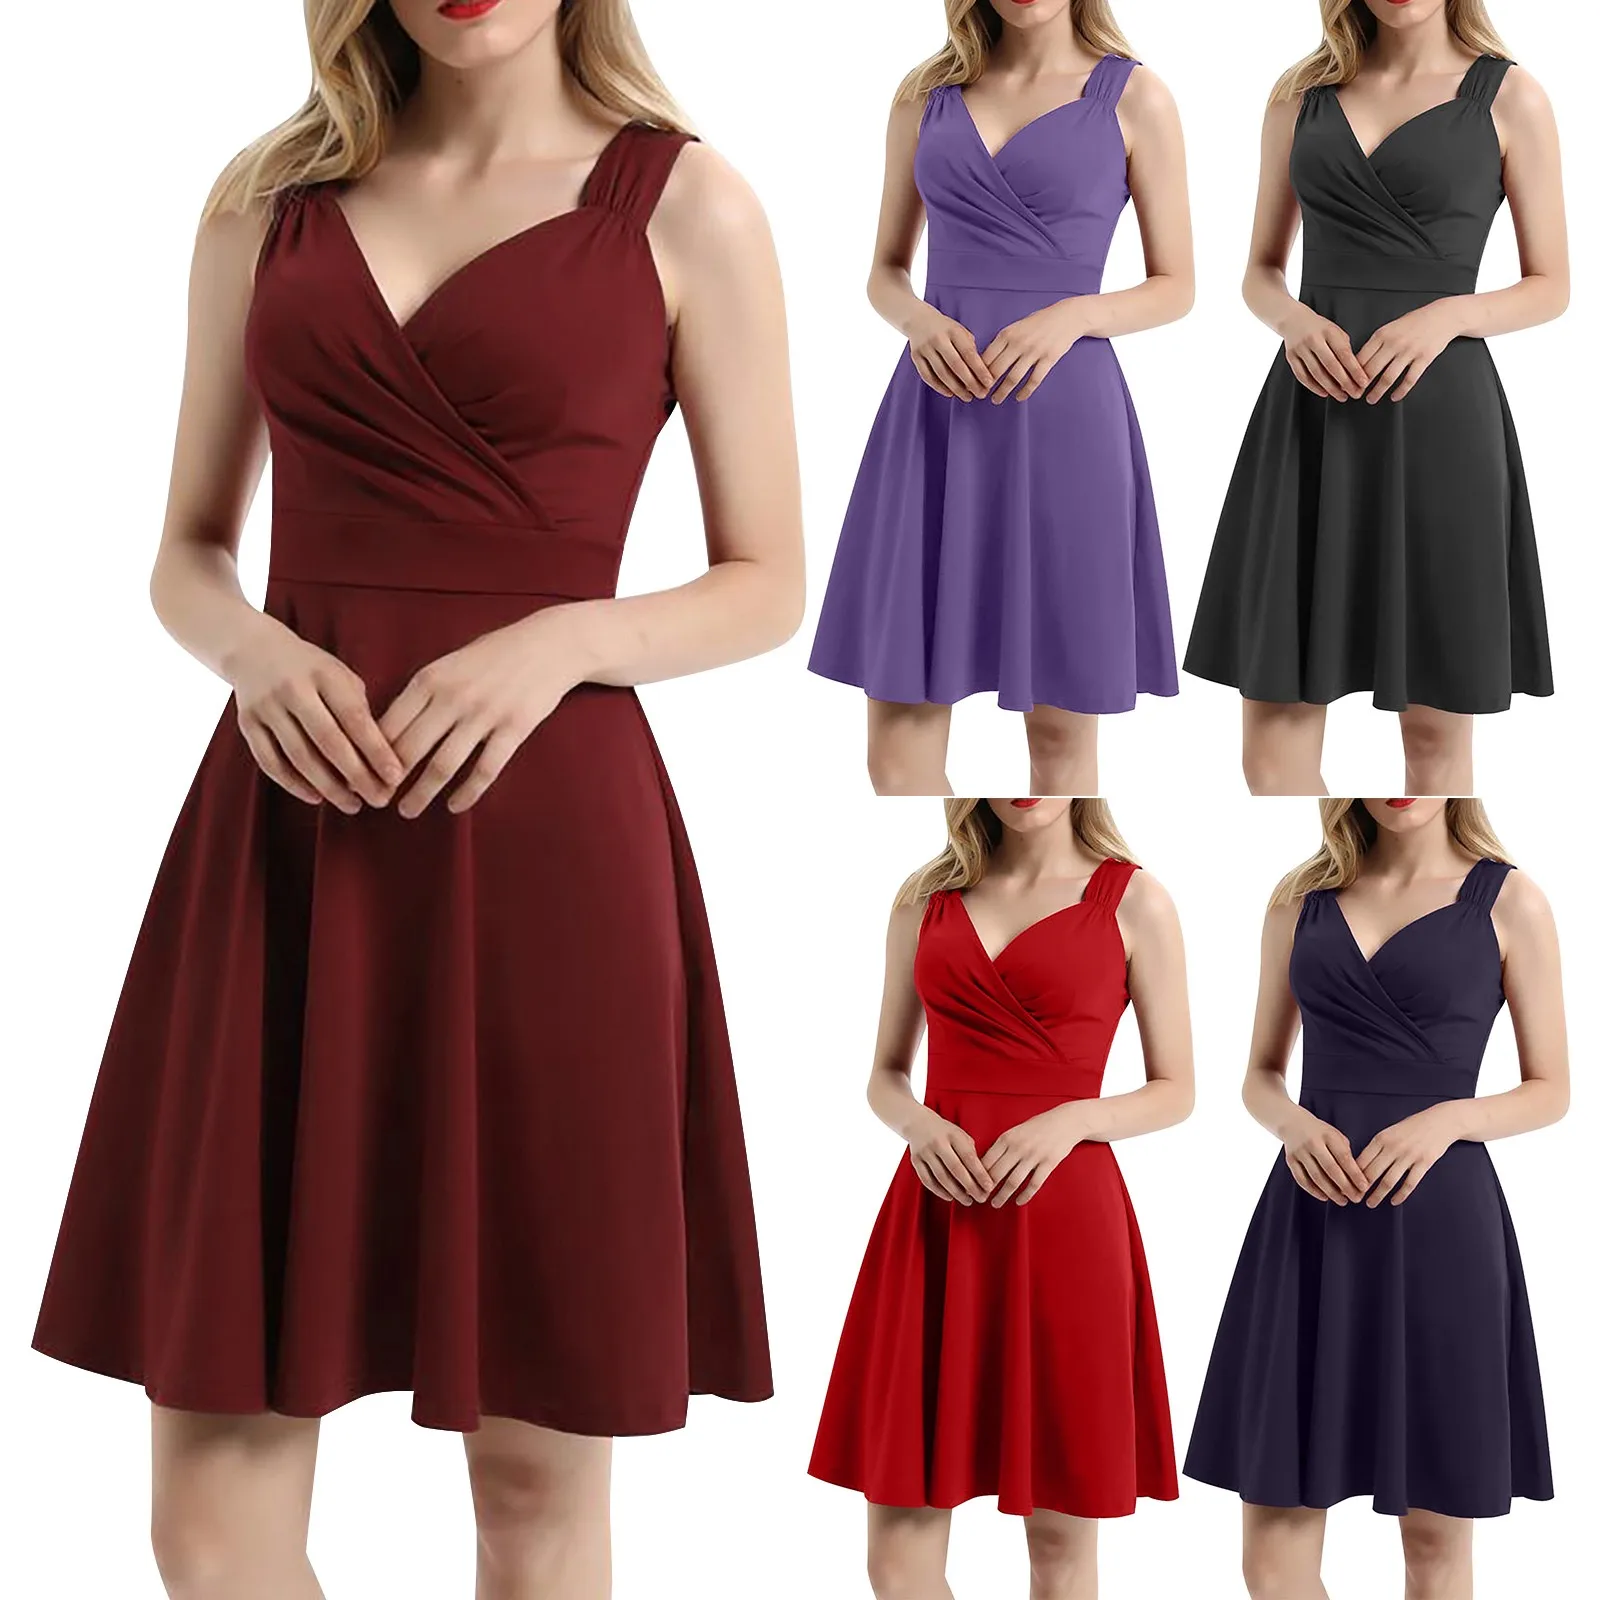 

Formal Dress Midi Length Personality Solid Color Vintage Dress Simple And Exquisite Design Pocket Maxi Dresses for Women